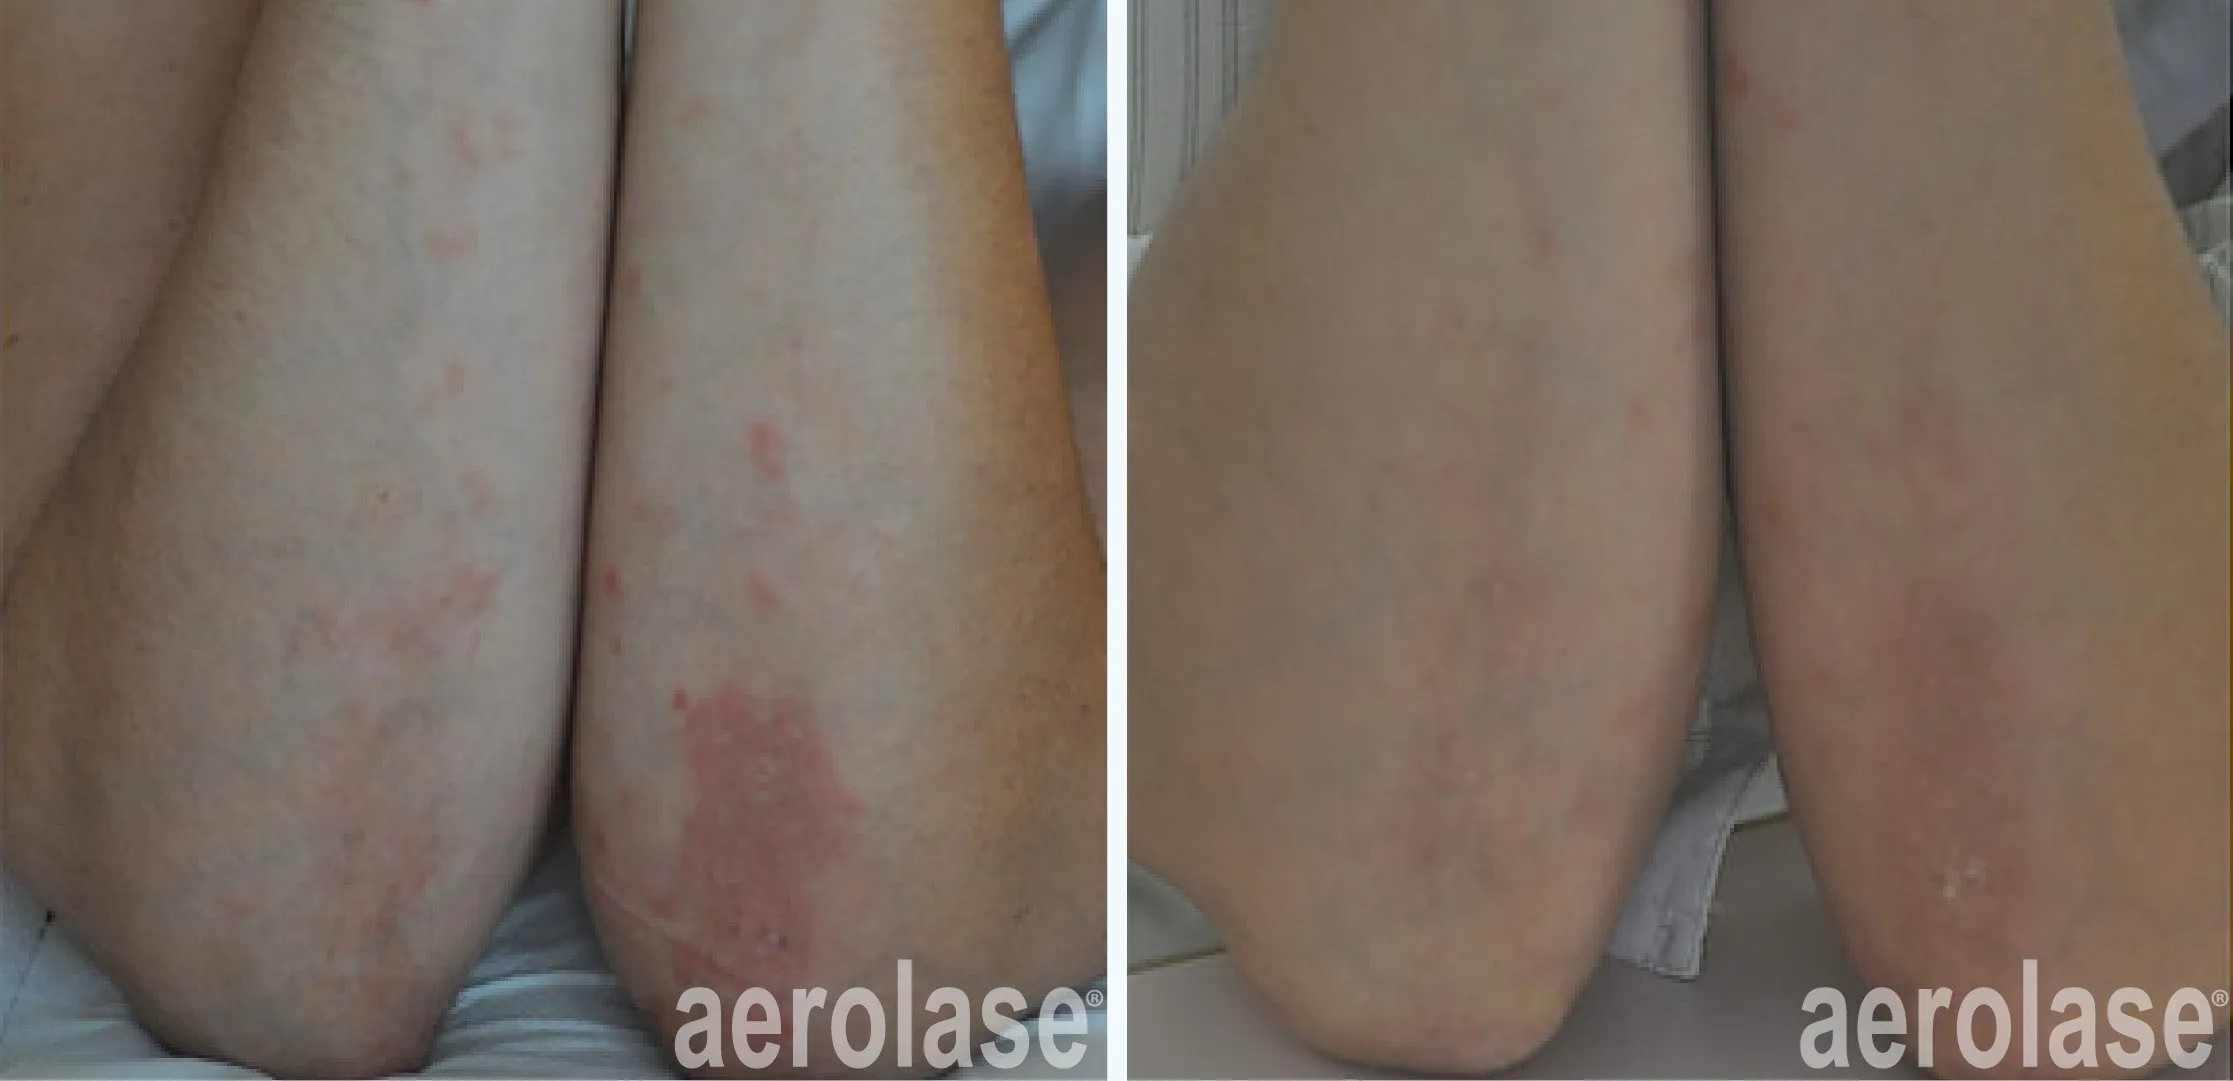 autoimmune-diseases-christine-dierickx-before-and-after